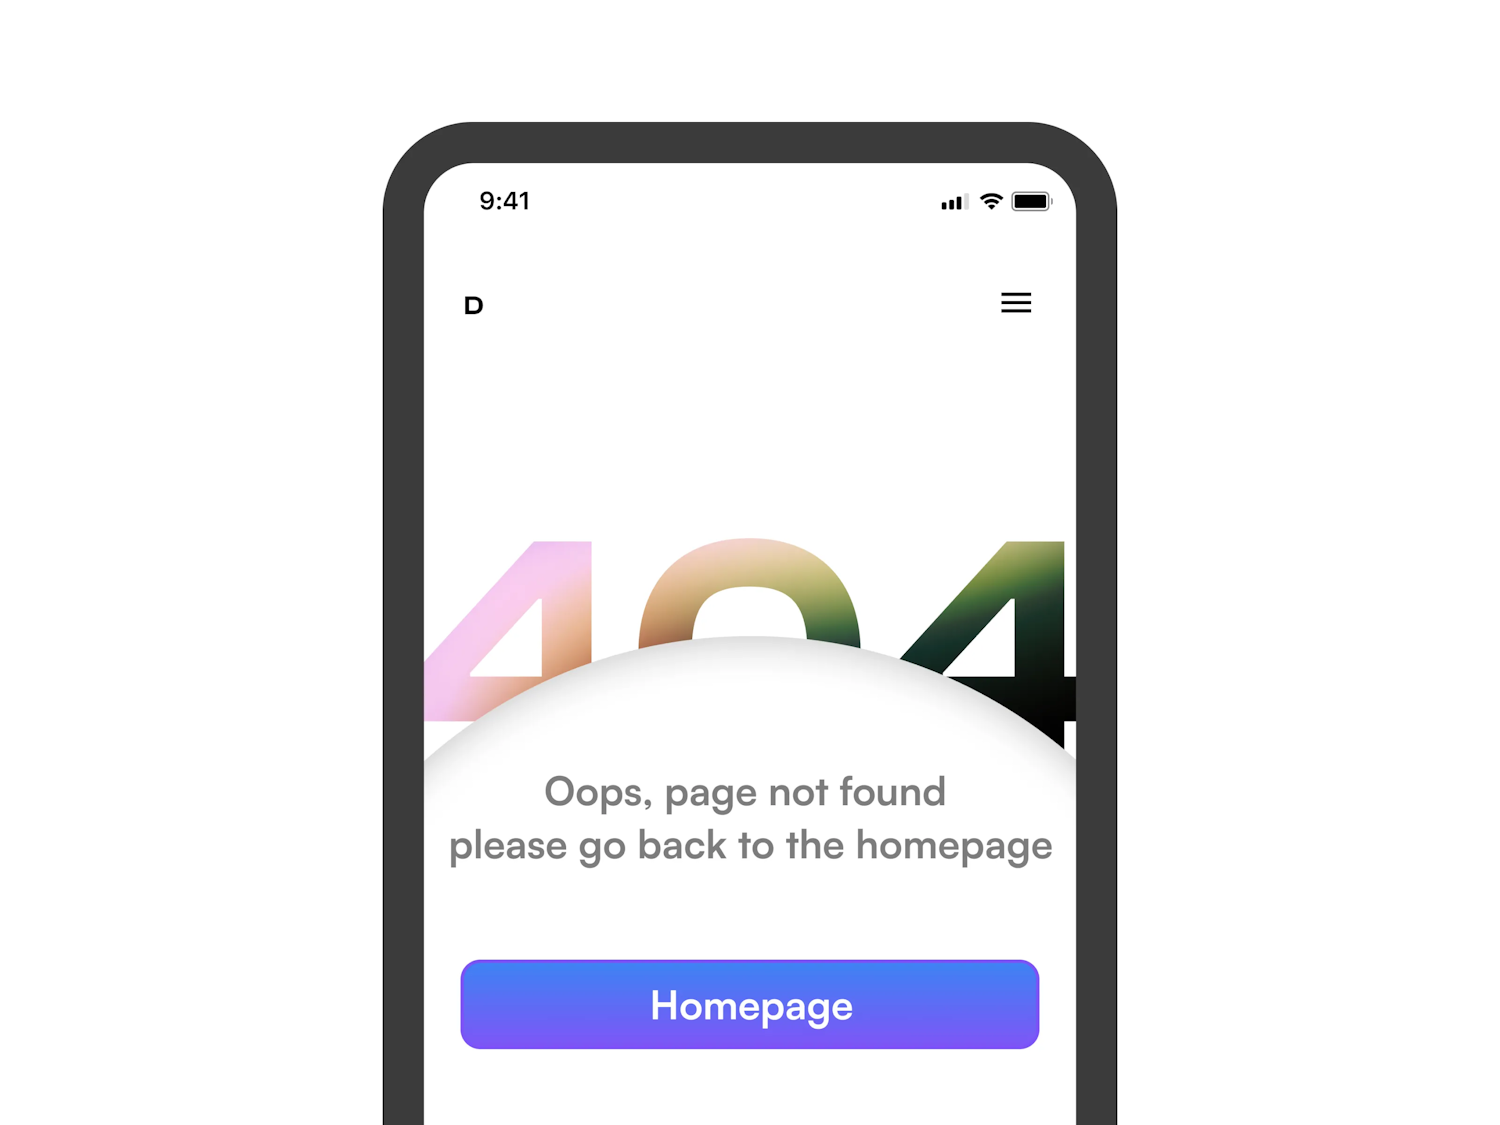 A mobile chrome with a website design in it. The page has a massive 404 with a curved content container overlaying it.The content reads "Oops, page not found please go back to the homepage". This is followed by a gradient purple button, labeled "Homepage".